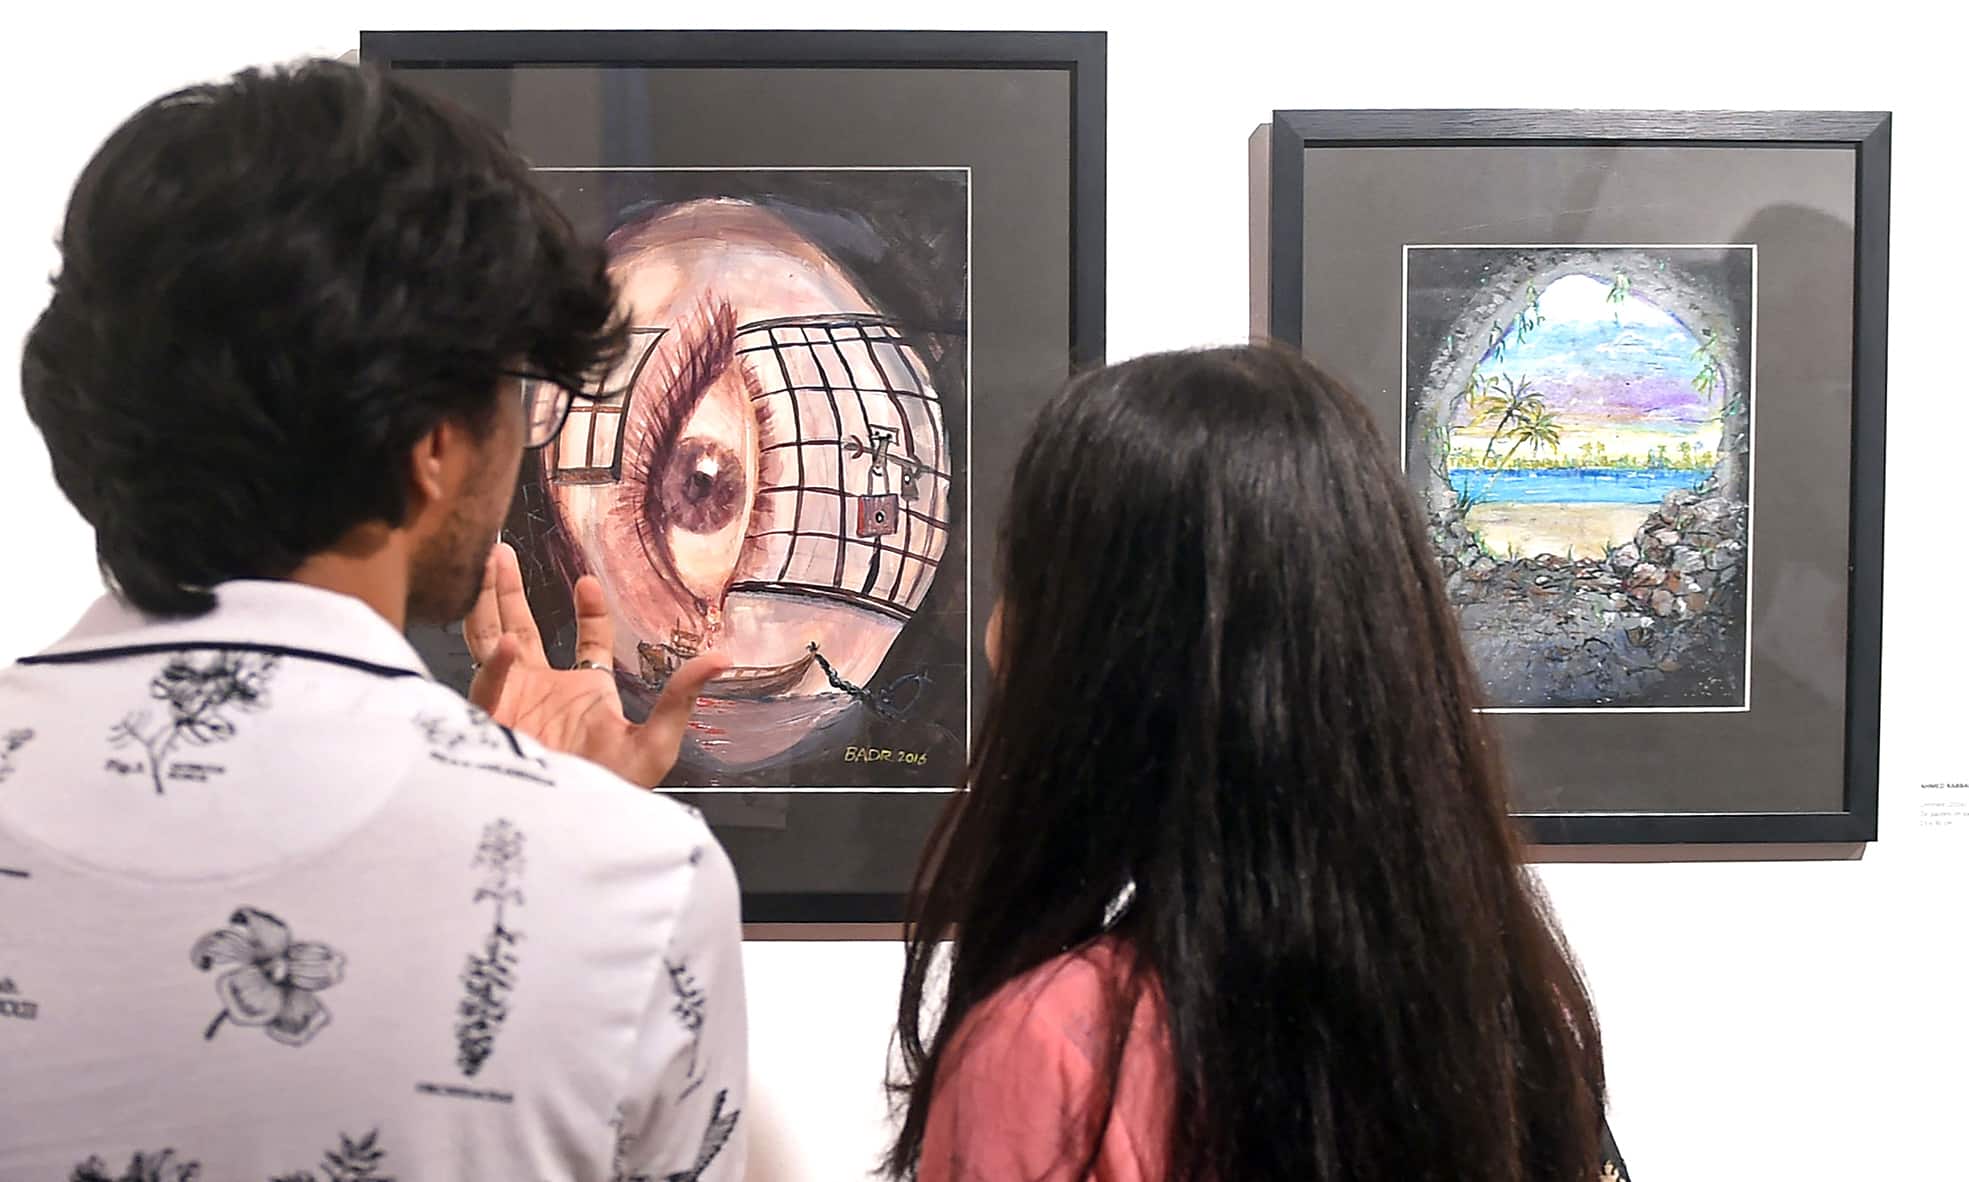 Visitors look at the paintings made by Ahmed Rabbani.